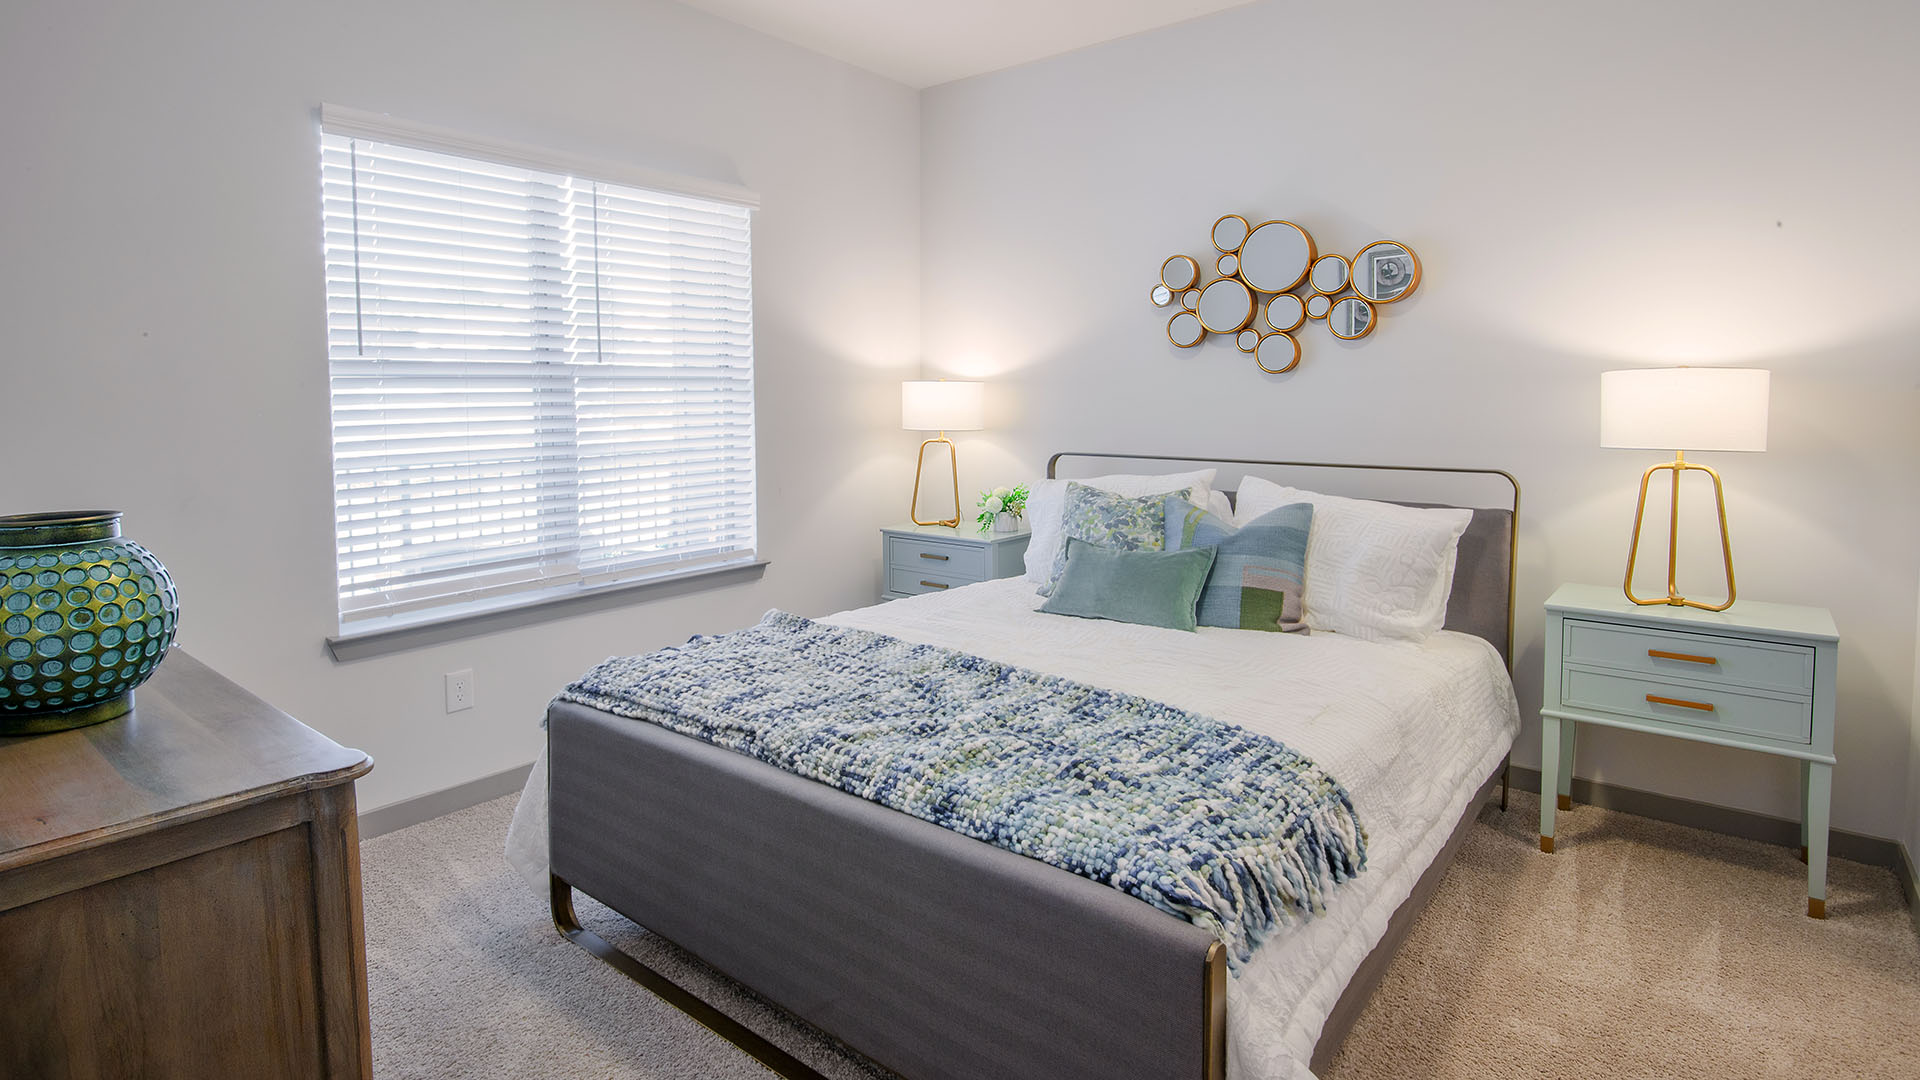 Two-Bedroom Apartments in Birmingham, AL- Axel Row- Wall-to-Wall Carpet with Large Window and Matching Blue Night Stands